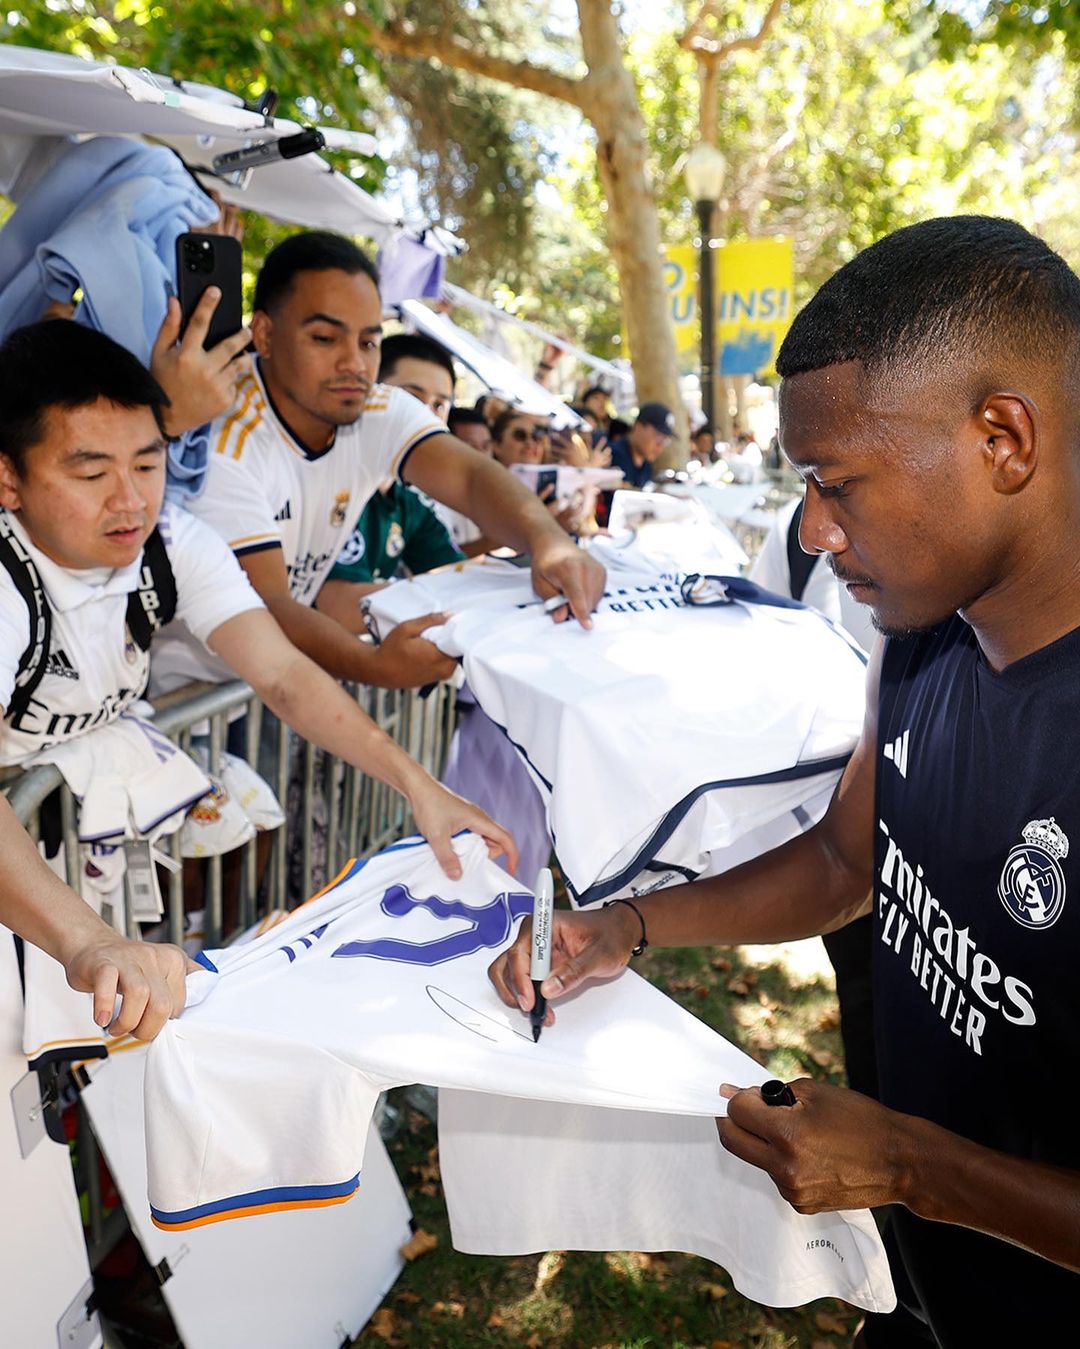 Real Madrid's superstars delivered a secret surprisҽ in Dallas, leaving everyone astonished